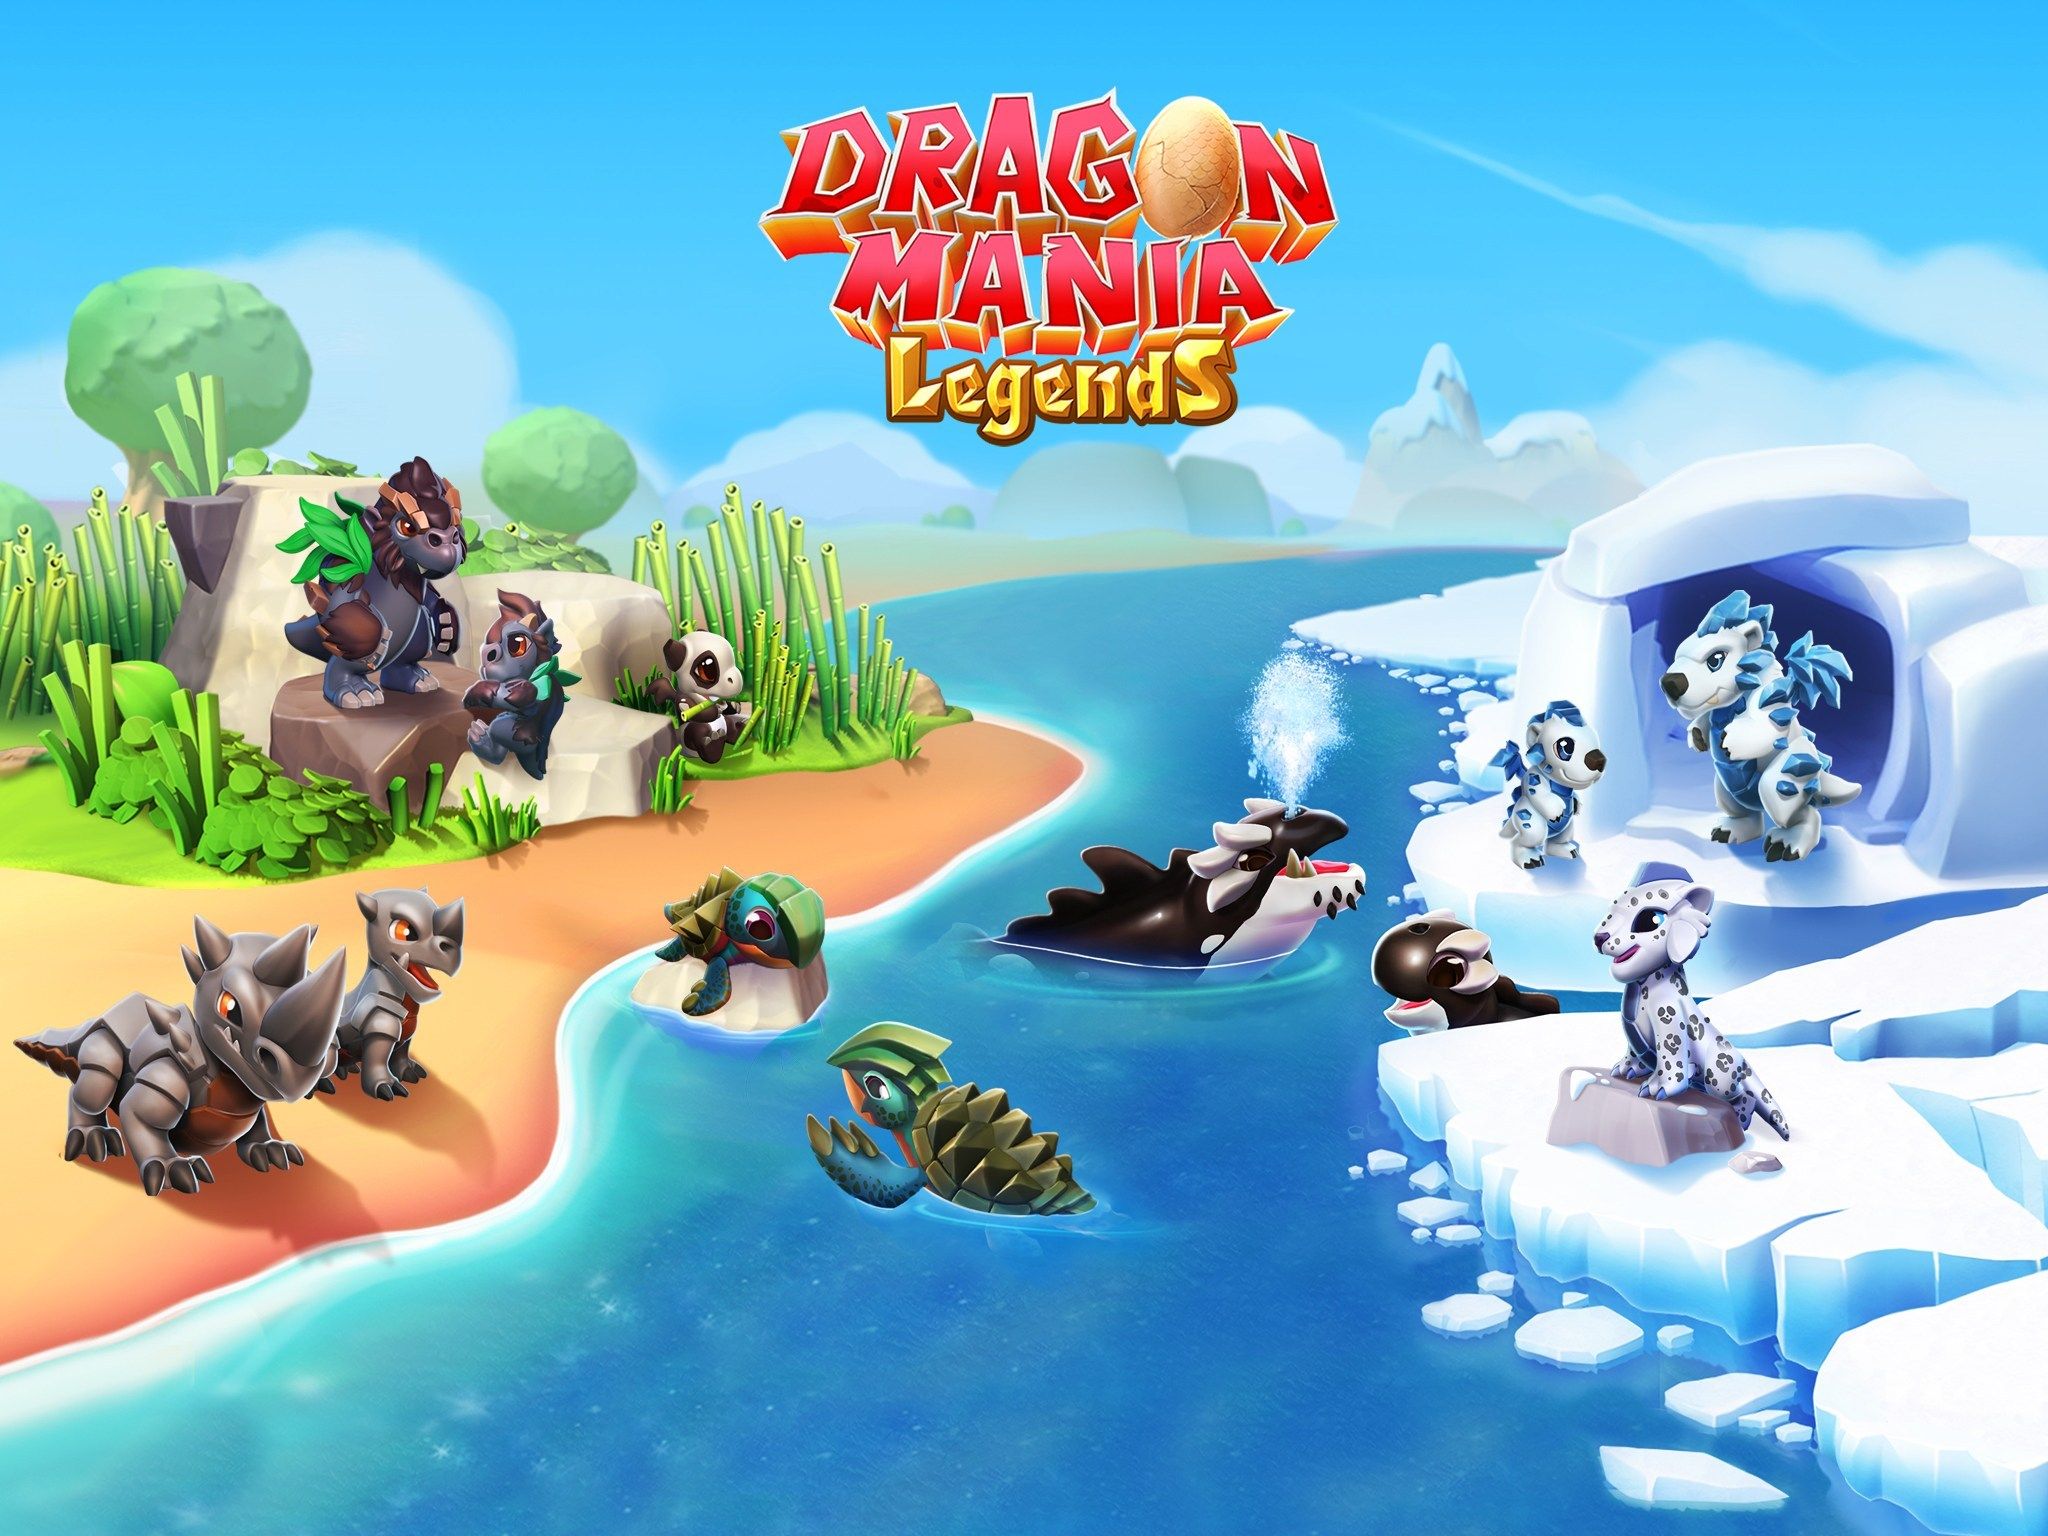 Dragon Mania Legends Show Their Paws For Global Charity Event